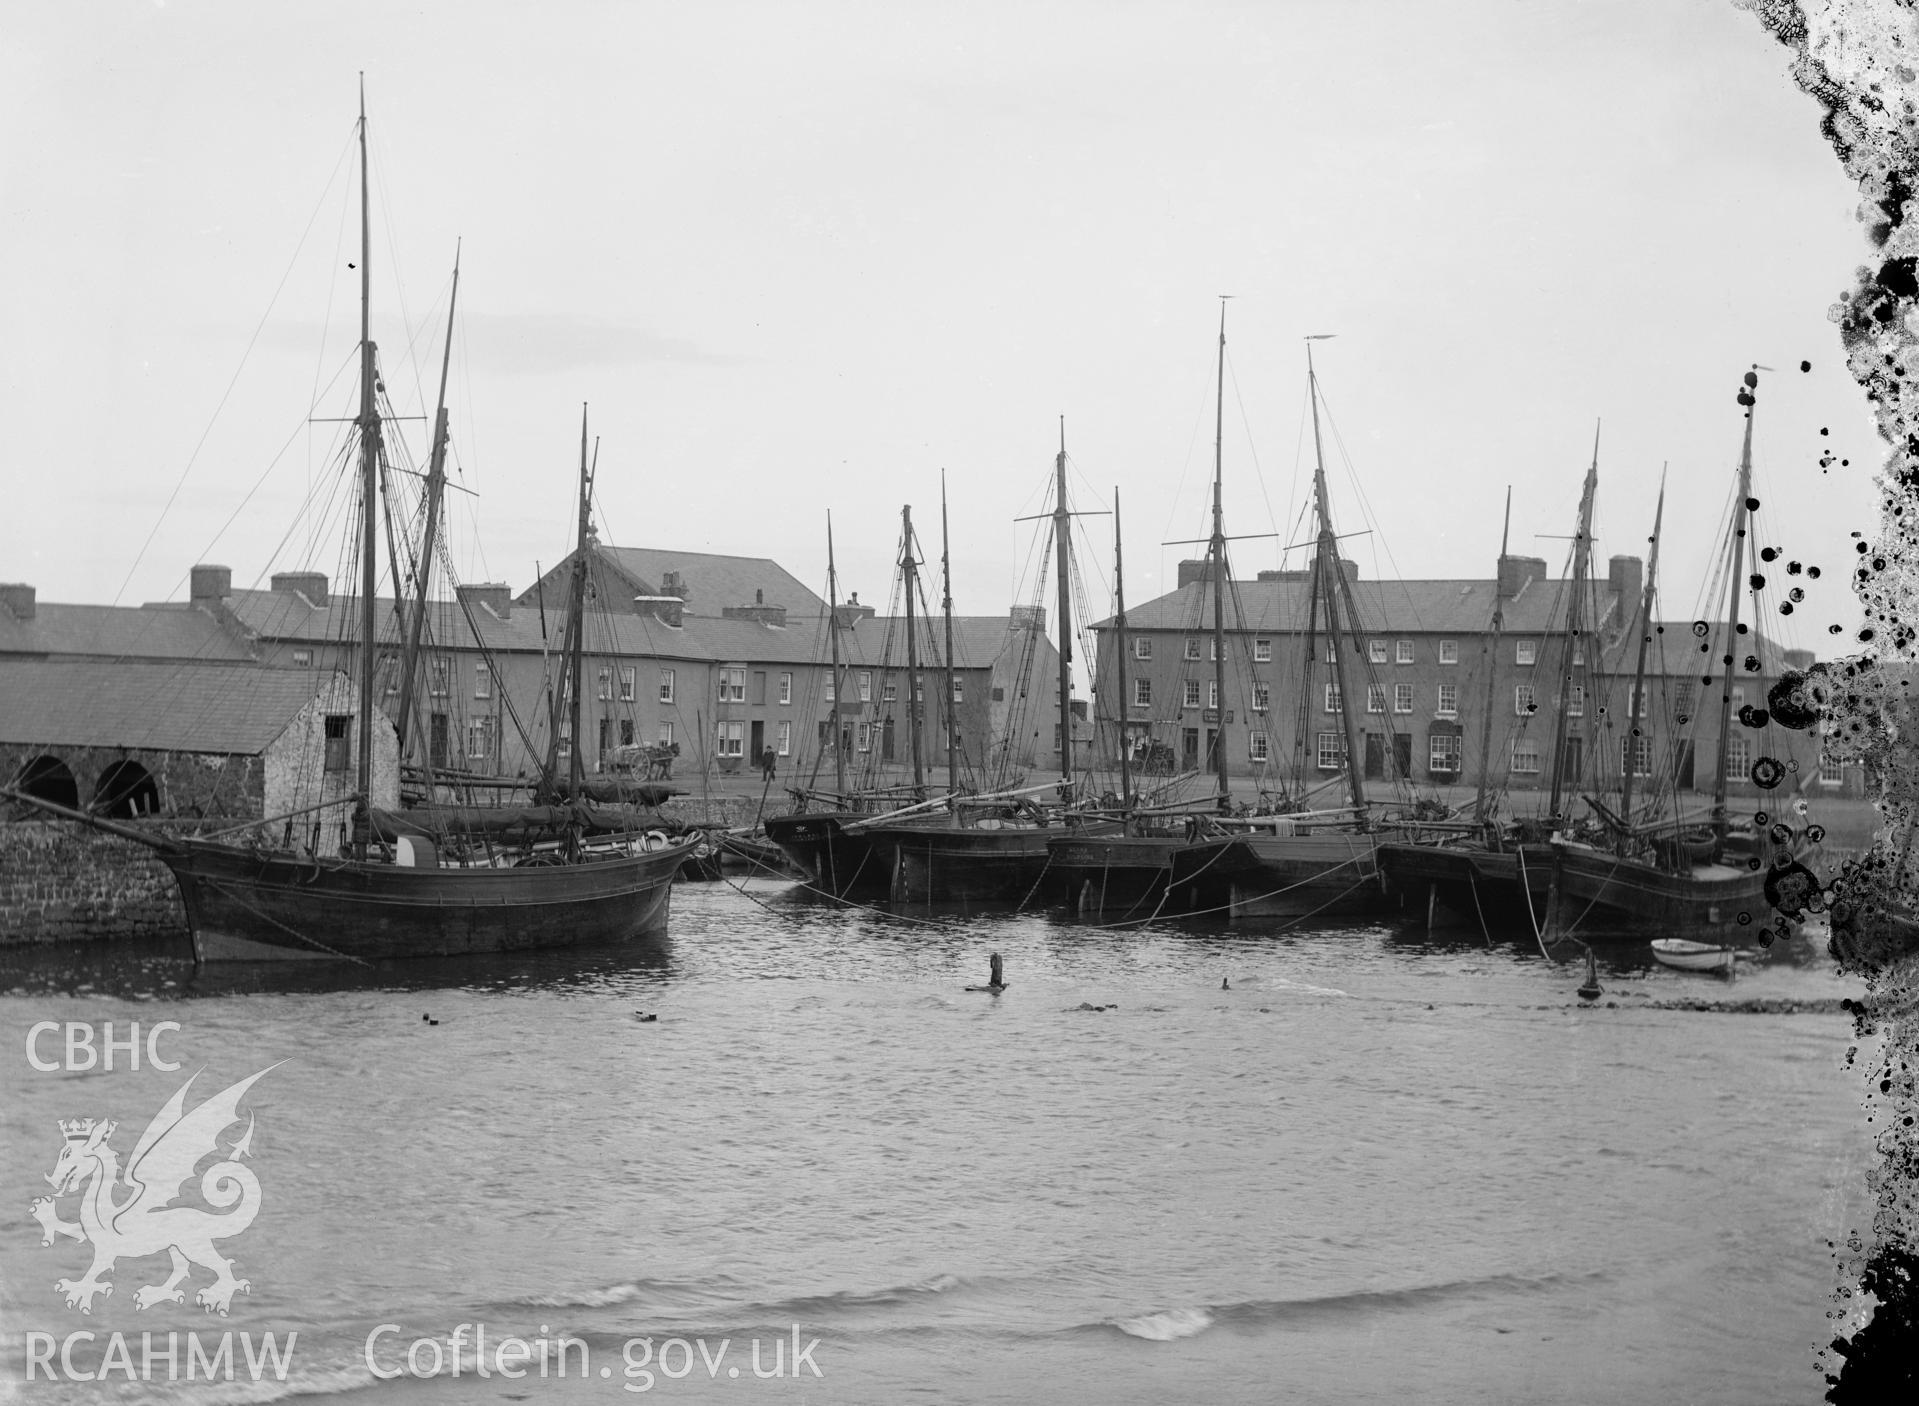 Black and white image dating from c.1910 showing the inner harbour in Aberaeron.